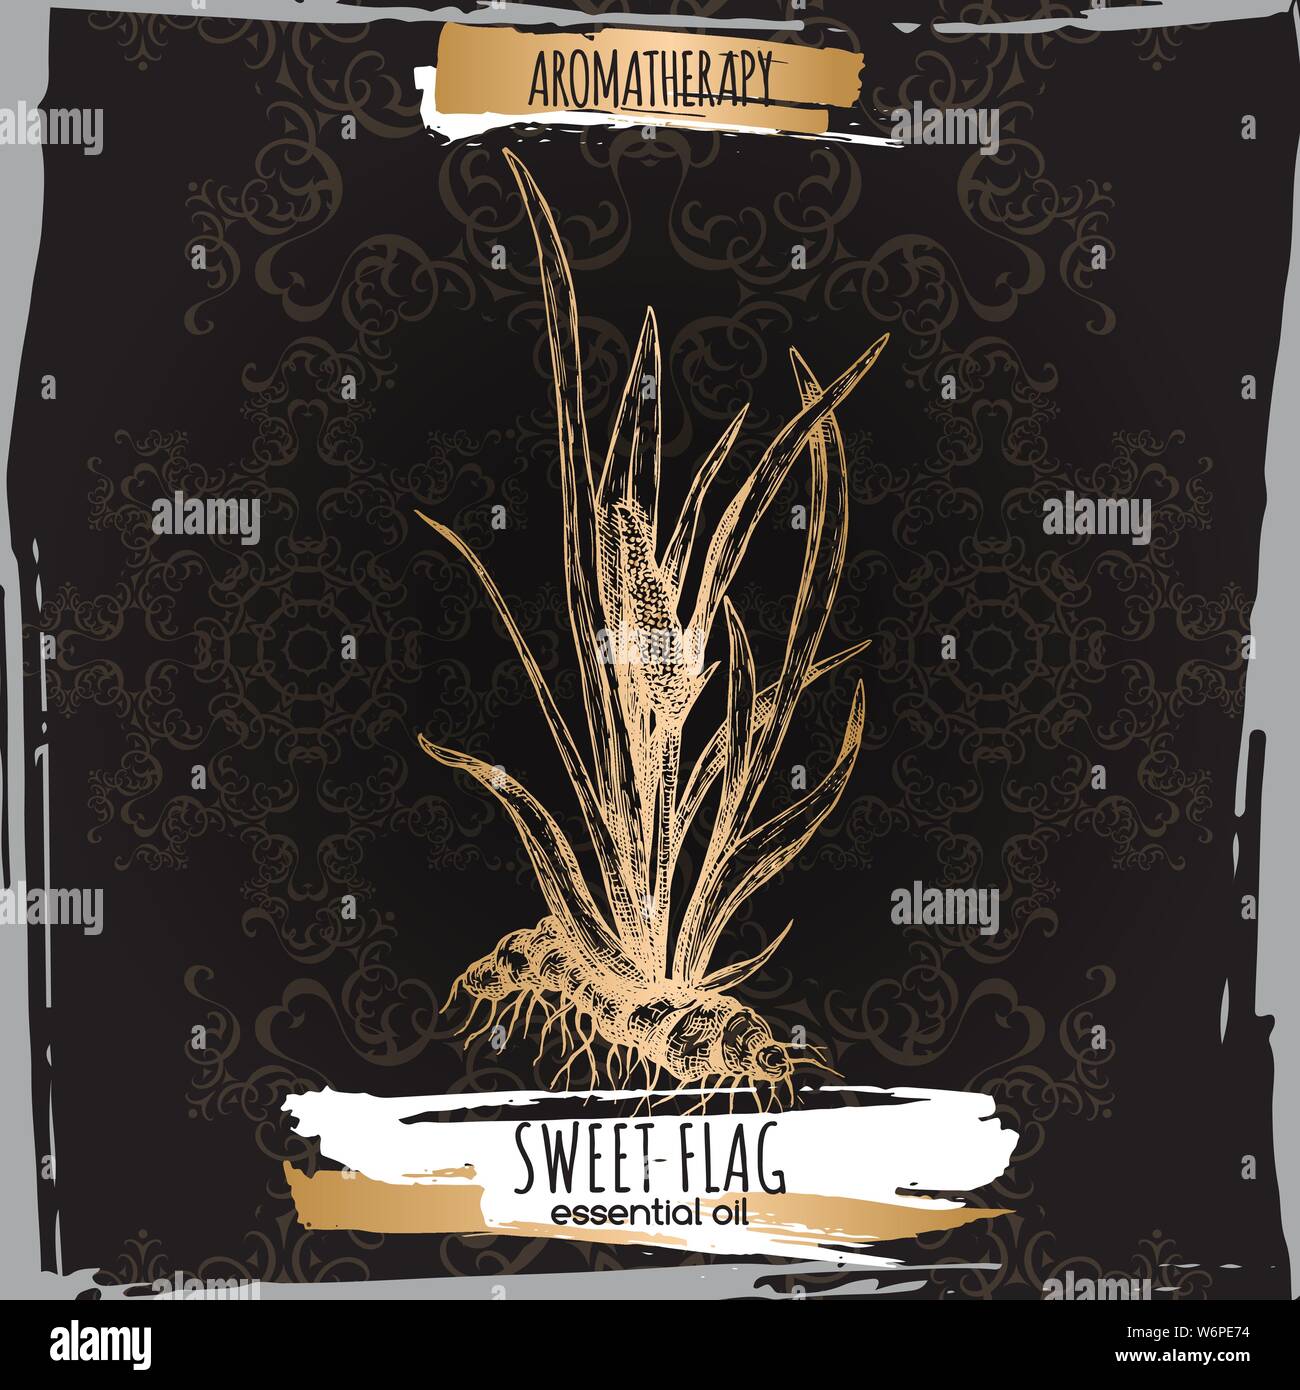 Acorus calamus aka sweet flag sketch on elegant black lace background. Great for traditional medicine, perfume design, cooking or gardening. Stock Vector